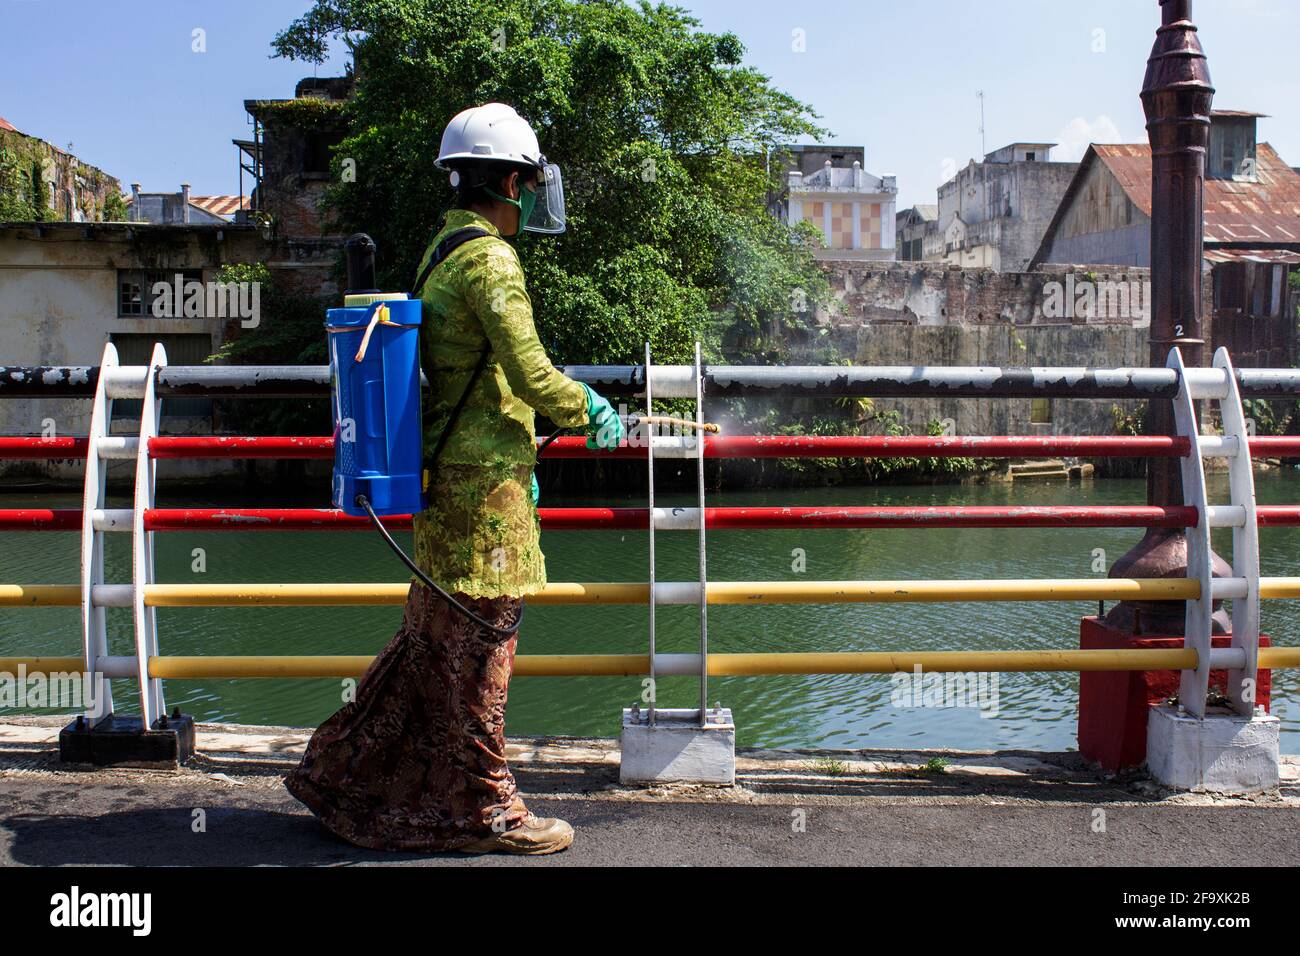 Padang, Indonesia, 21st April 2021. Women in Indonesia, Padang City, West Sumatra province wear the Kebaya to celebrate Kartini Day and spraying disinfectants on public roads in Batang Arau Village. Kariadil Harefa. Stock Photo